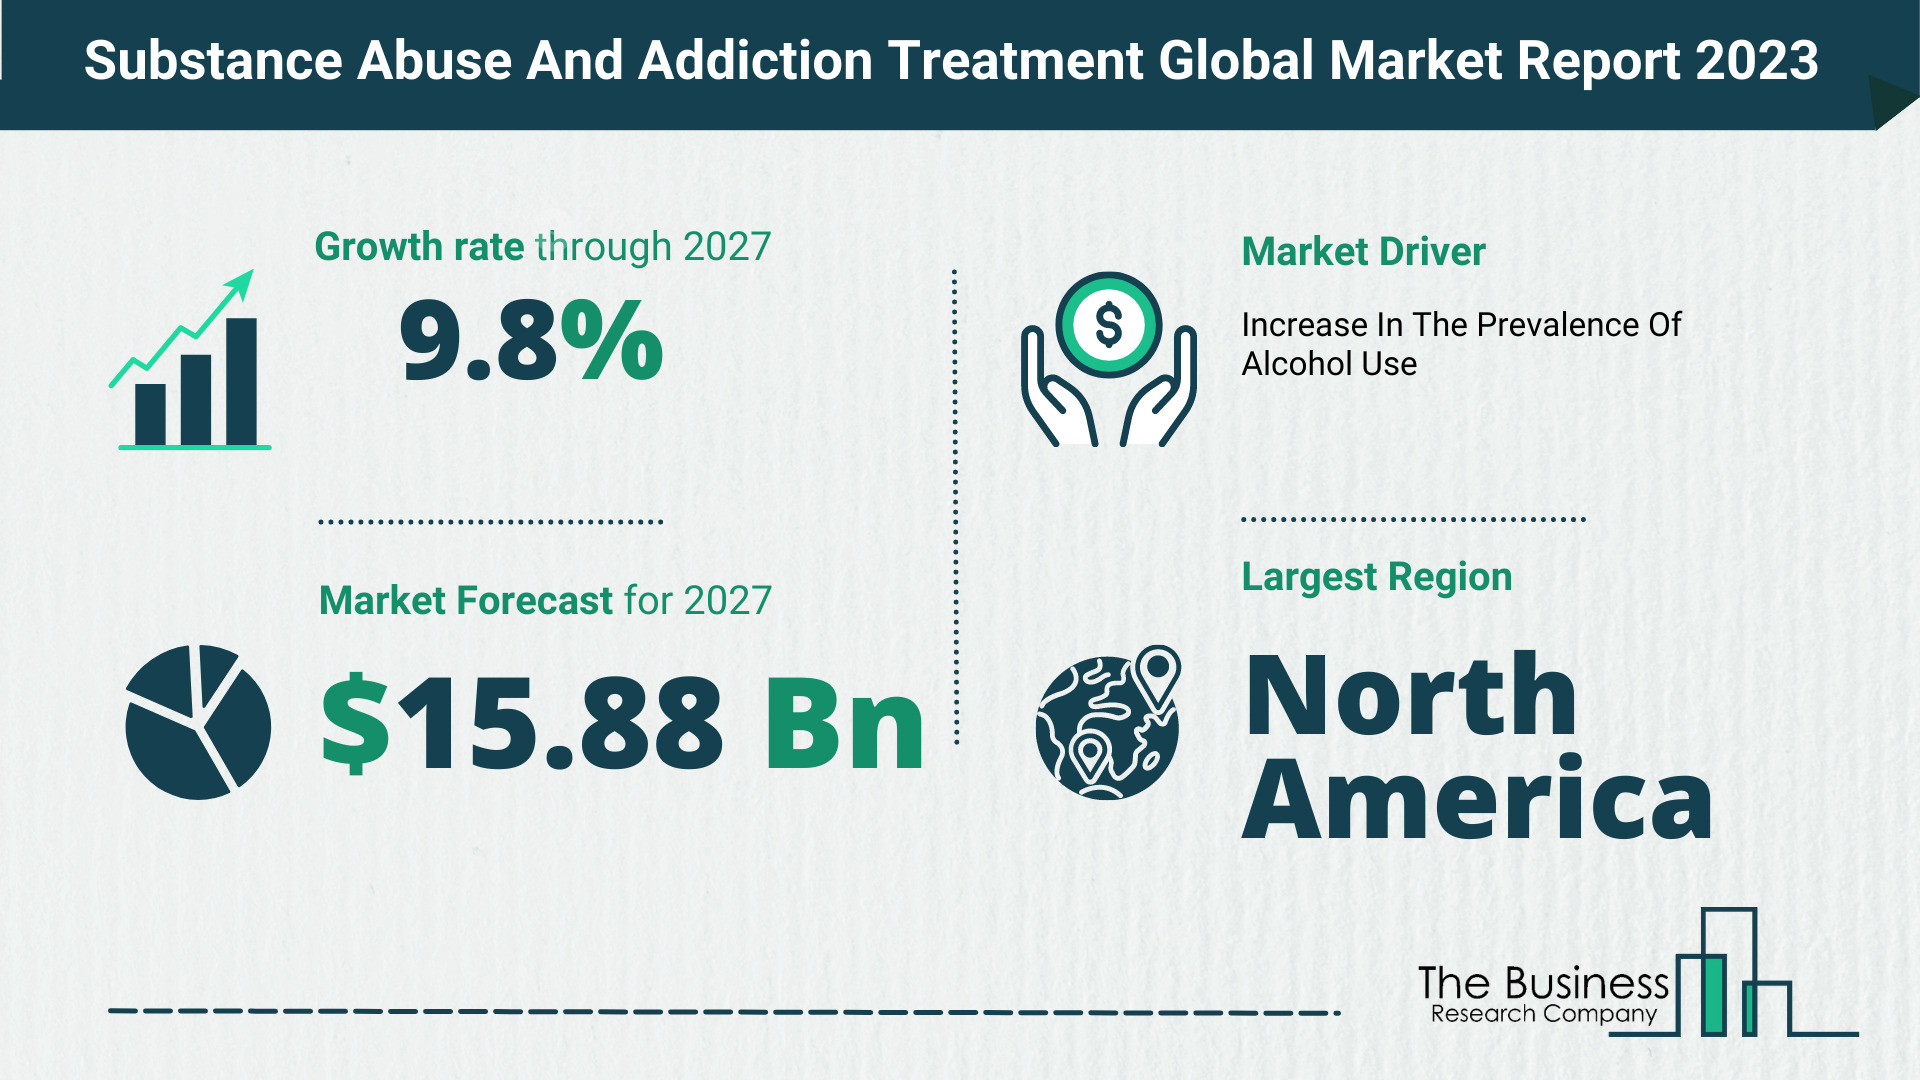 How Will The Substance Abuse And Addiction Treatment Market Globally Expand In 2023?